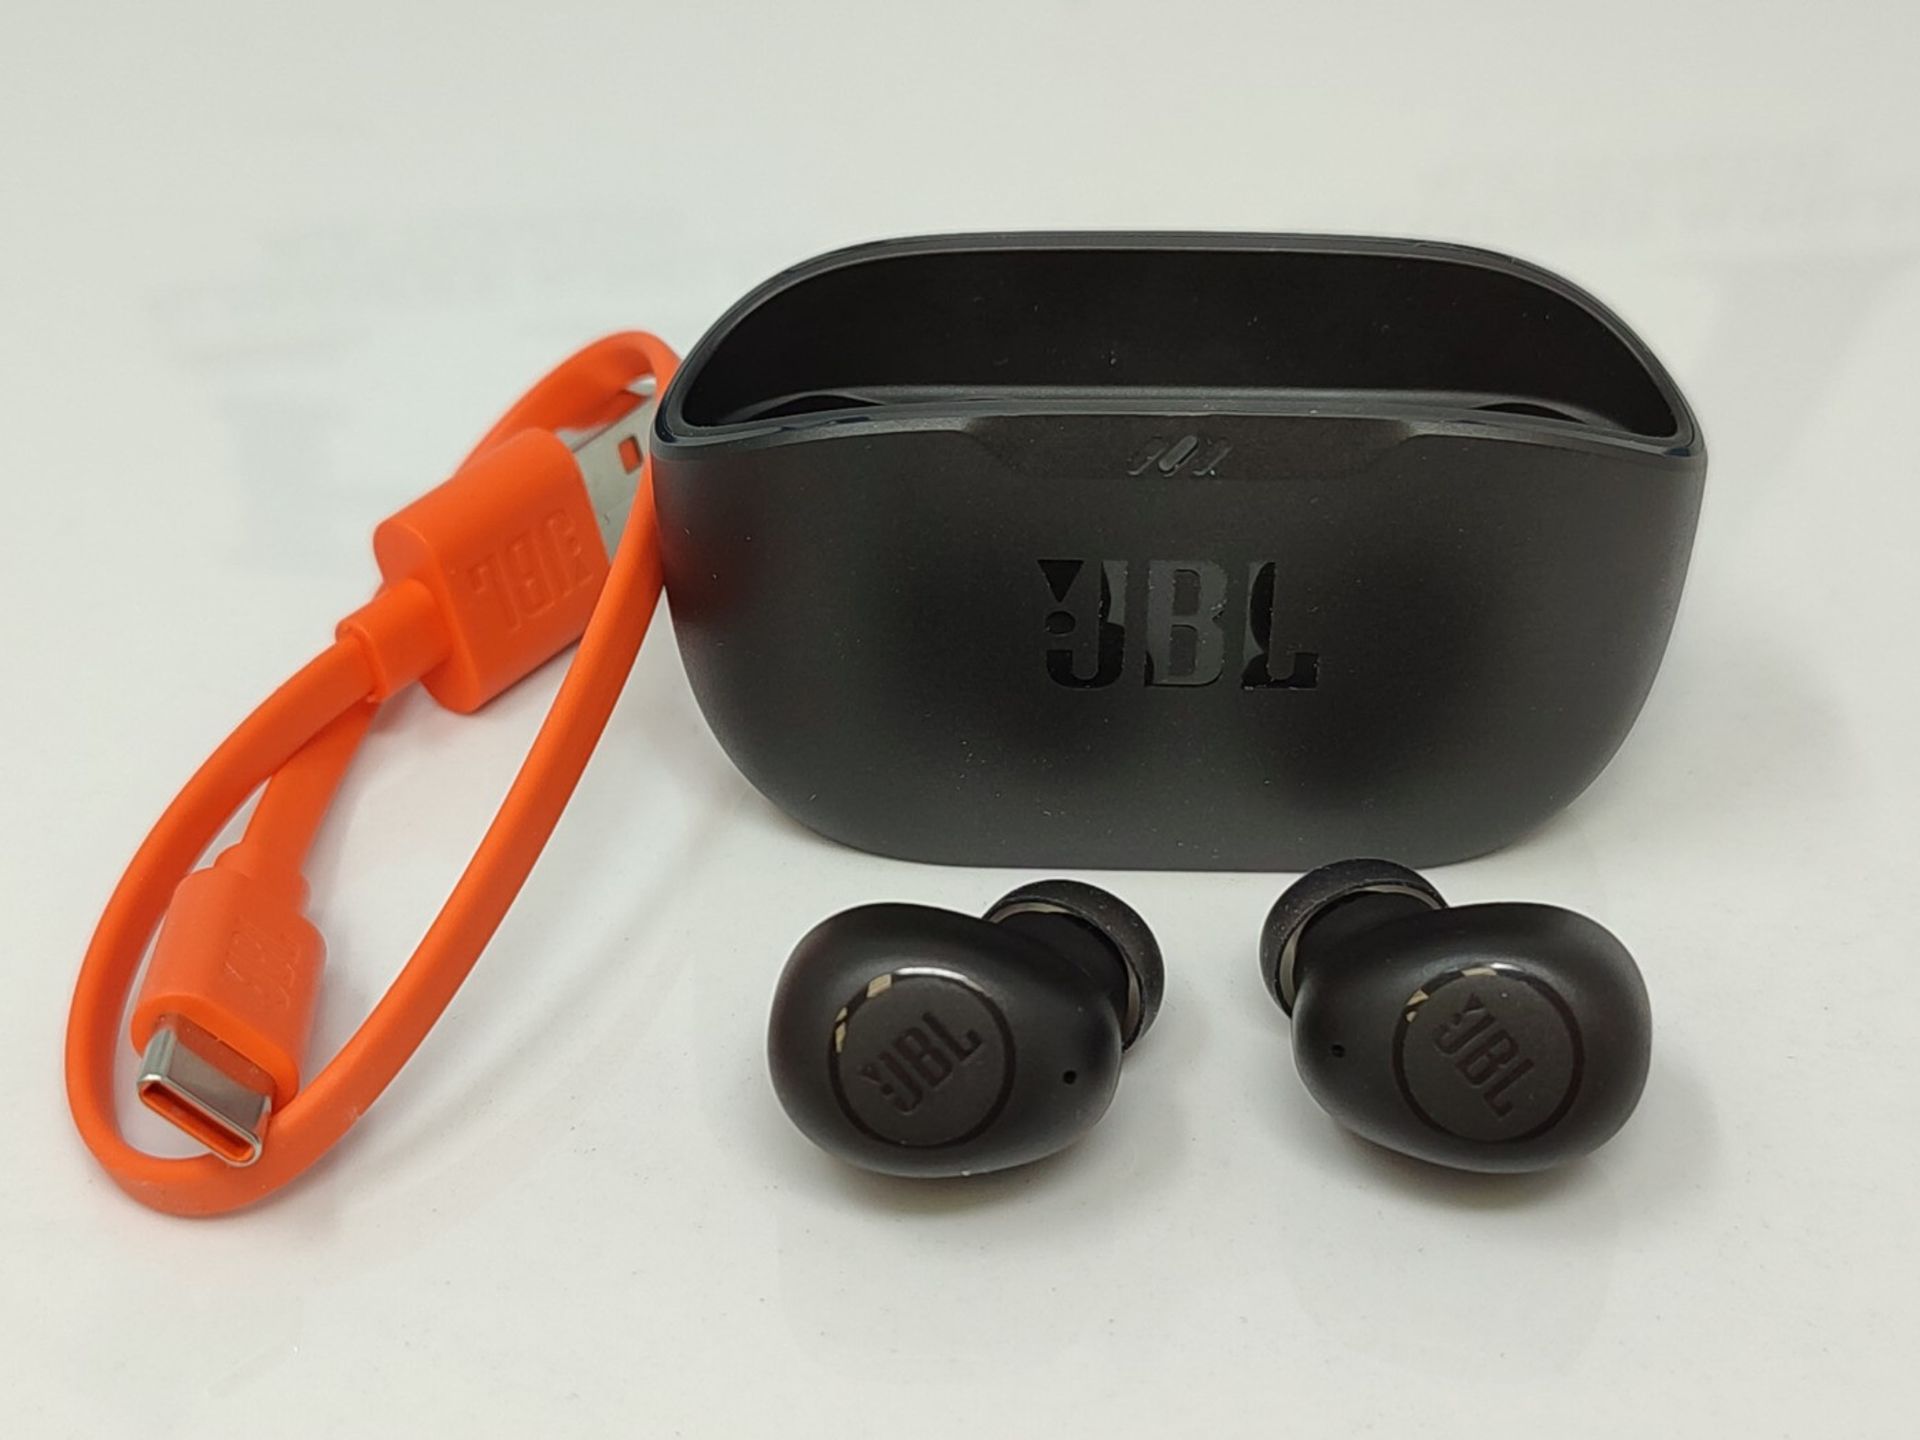 JBL Wave Buds - Wireless In-Ear Earbuds with IP54 and IPX2 waterproofing - Powerful ba - Image 3 of 6